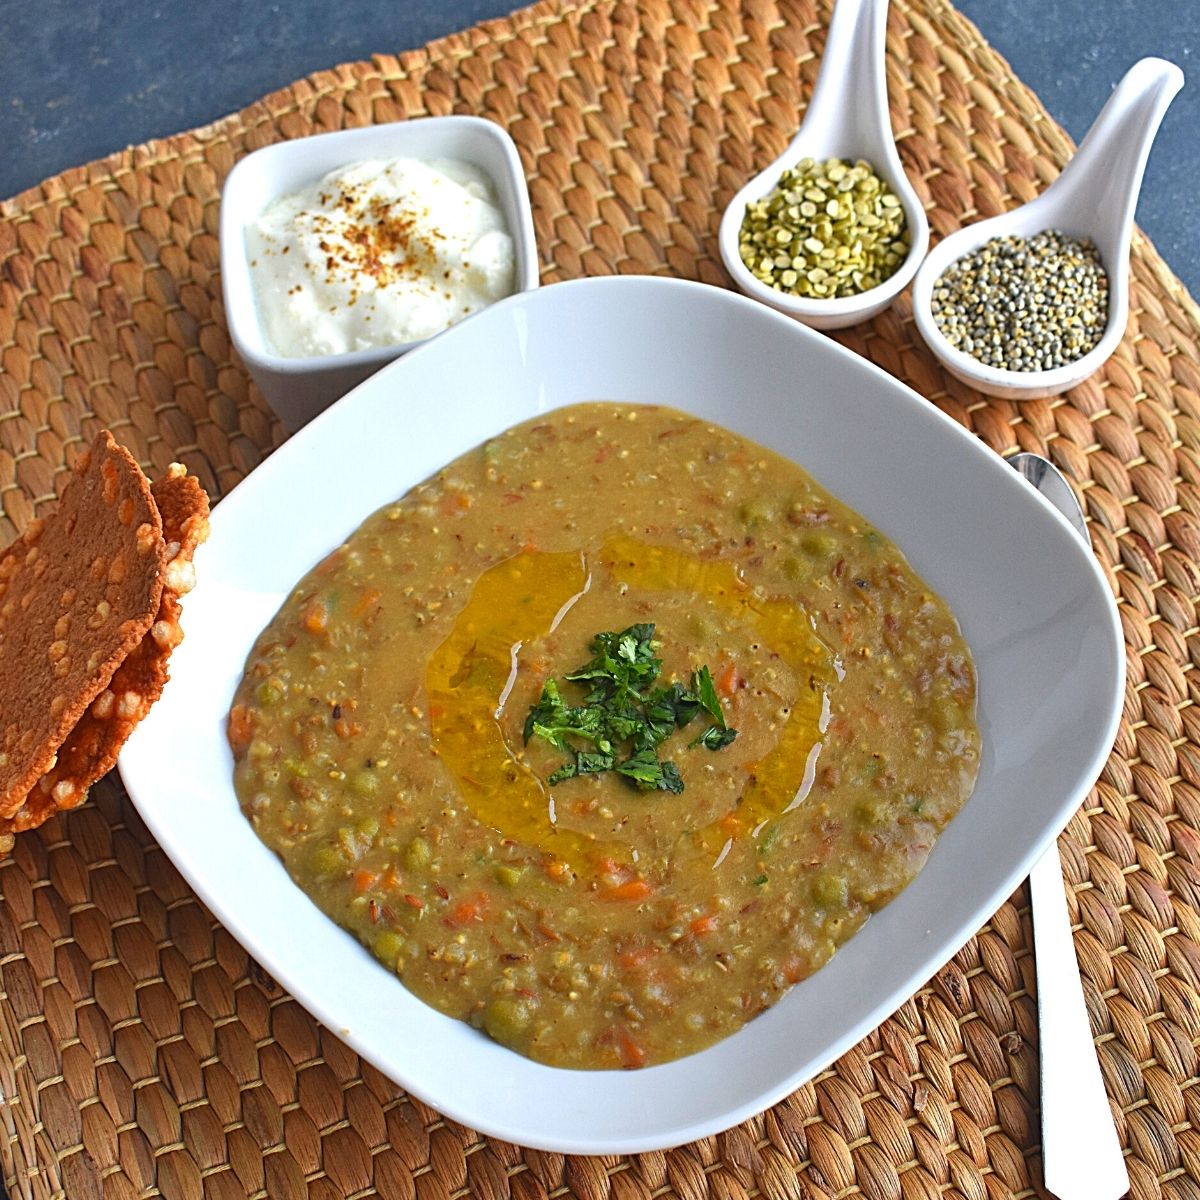 Close up view of Bajra and Green Dal Khichdi served in a white rectangular bowl, with ghee drizzled on top and some coriander sprinkled. Seen in background is dal and bajra, along with dahi and sabudana (Sago seeds) papad